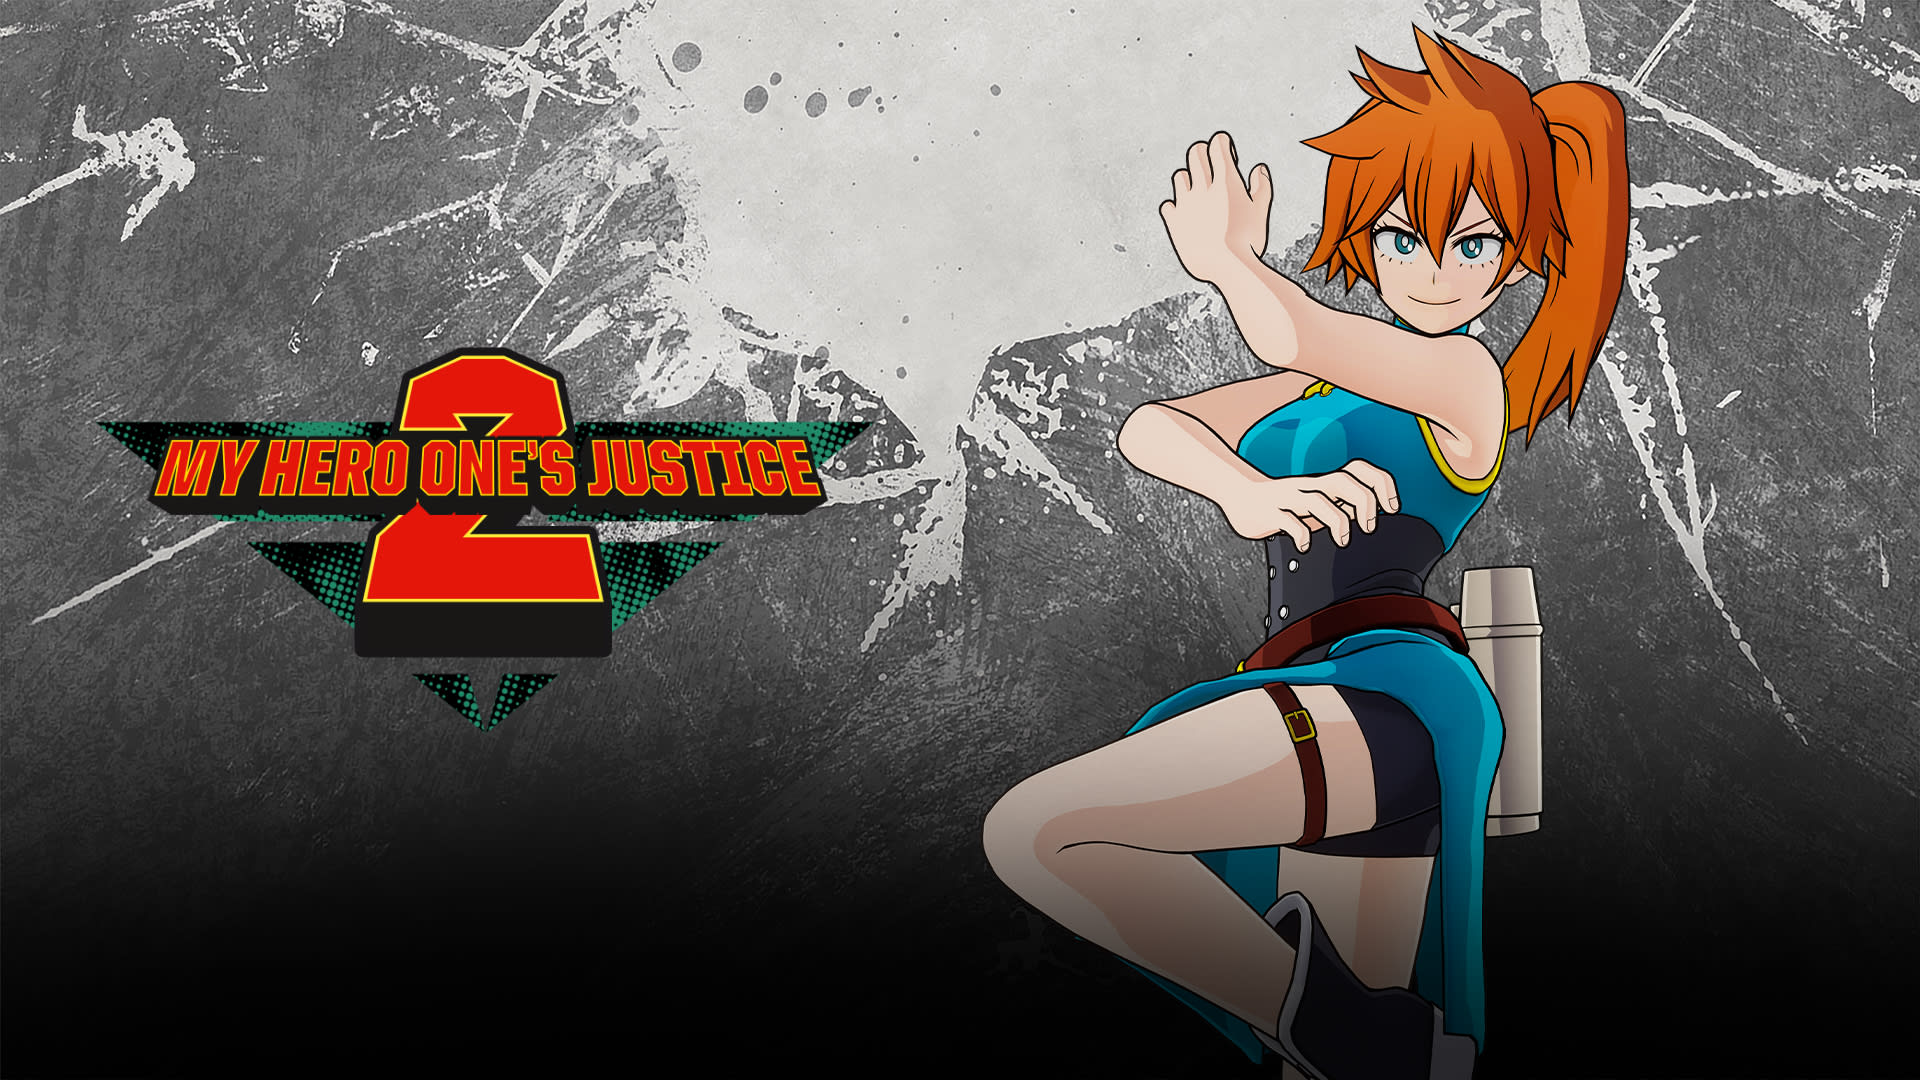 MY HERO ONE'S JUSTICE 2 DLC Pack 3: Itsuka Kendo 1